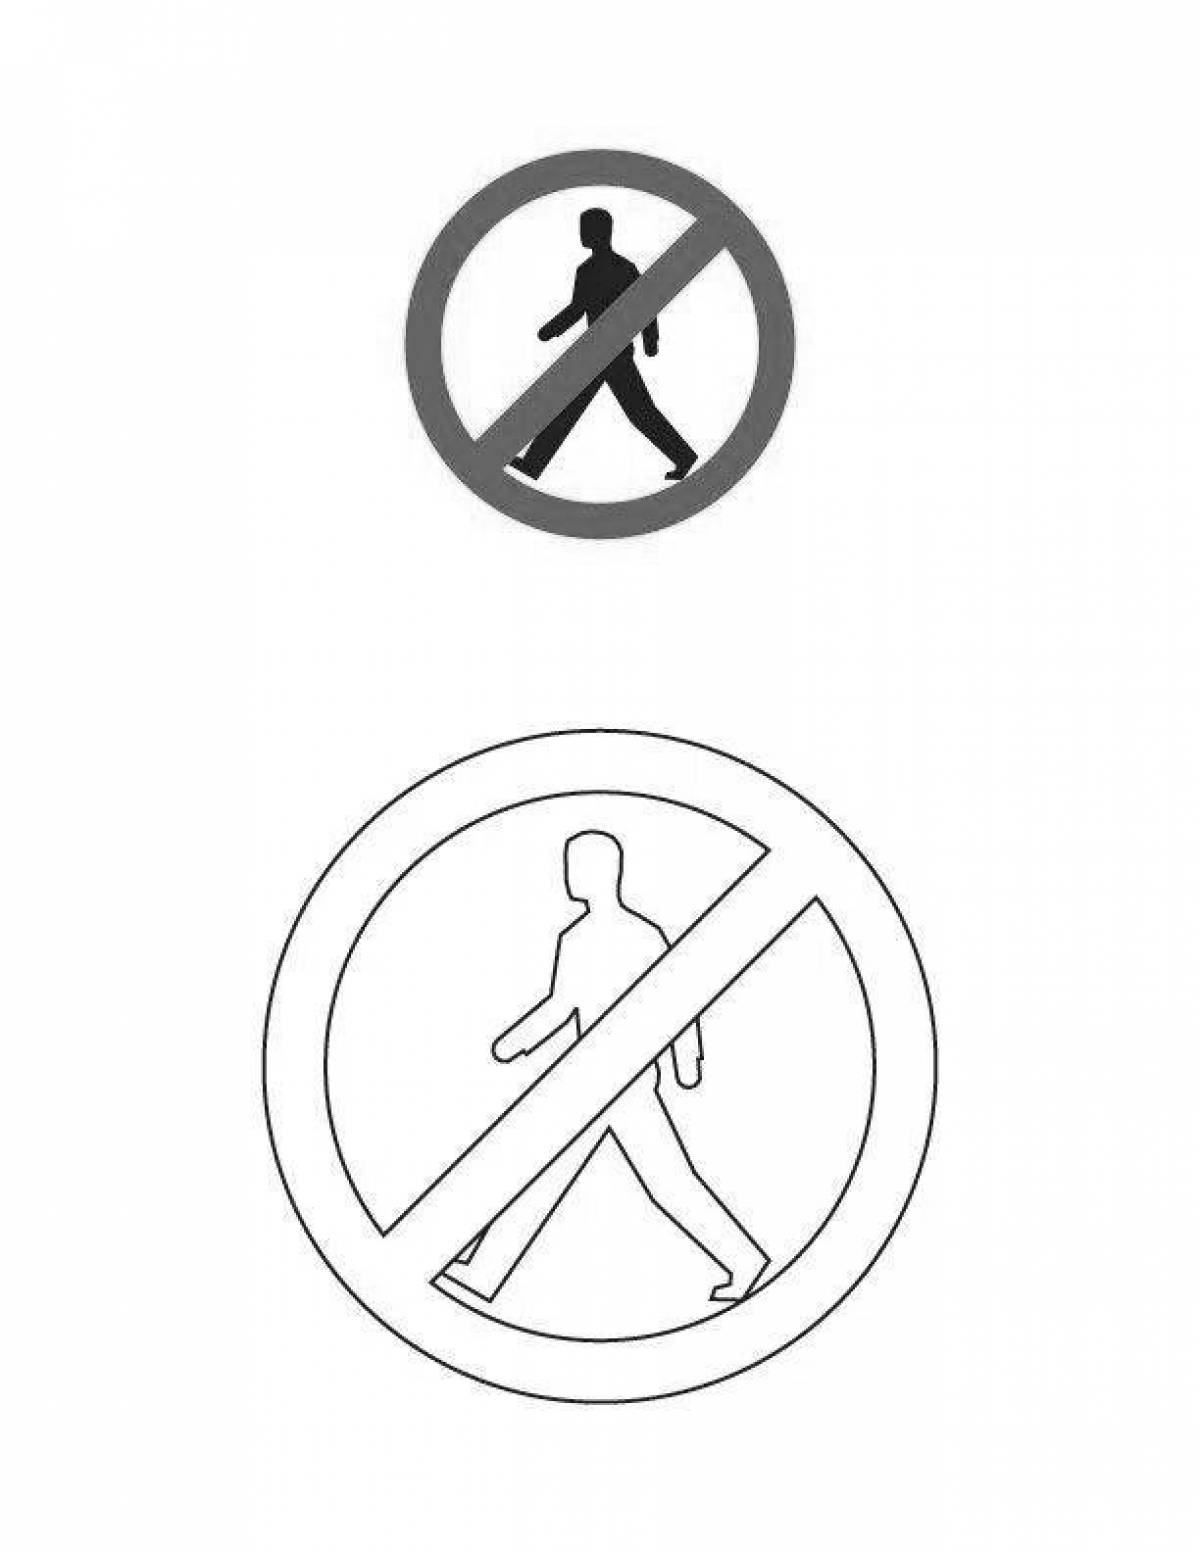 No pedestrian traffic sign coloring page